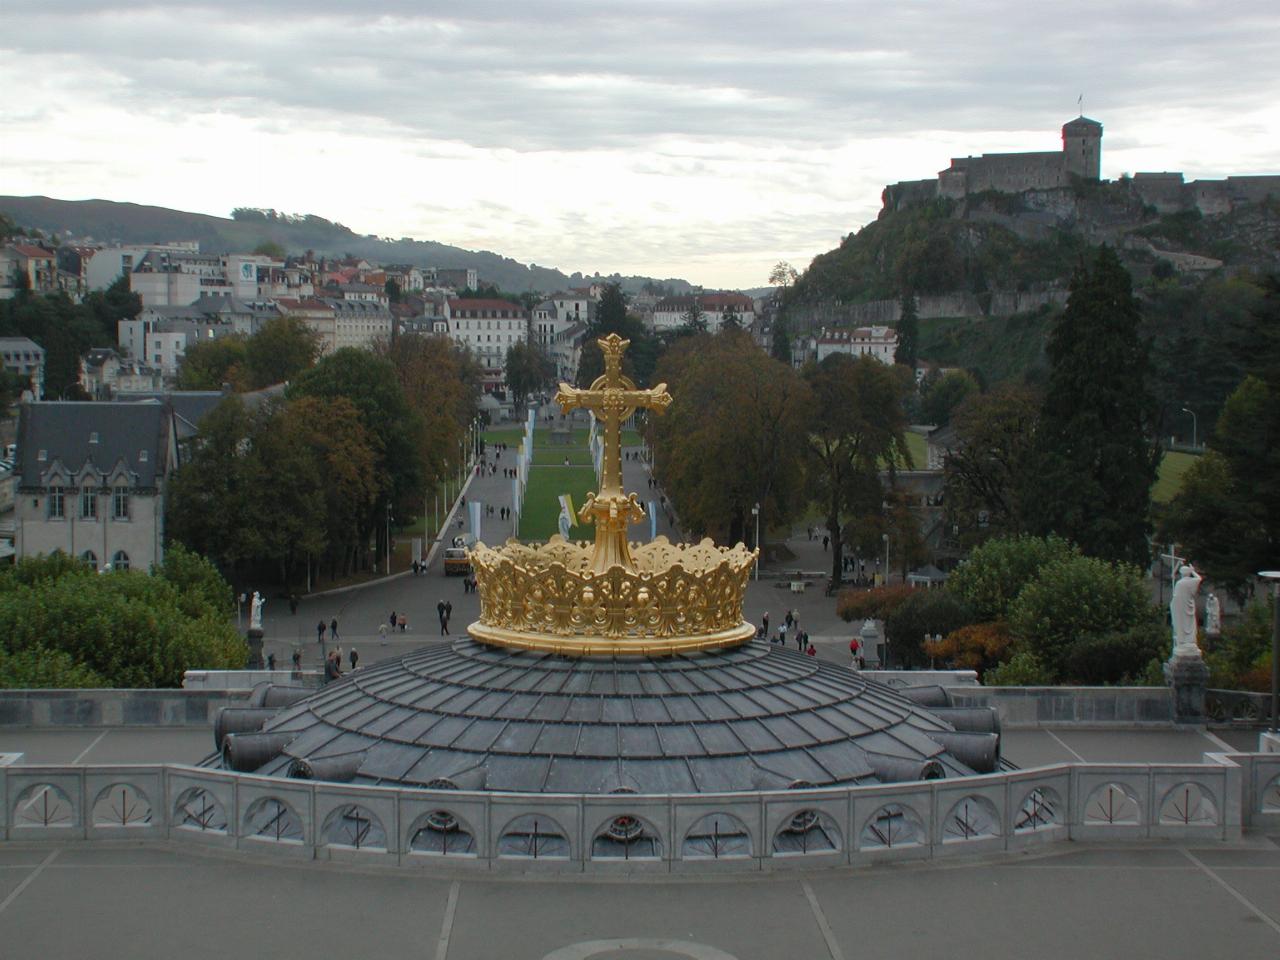 From upper section of Lourdes Cathedral looking along procession route